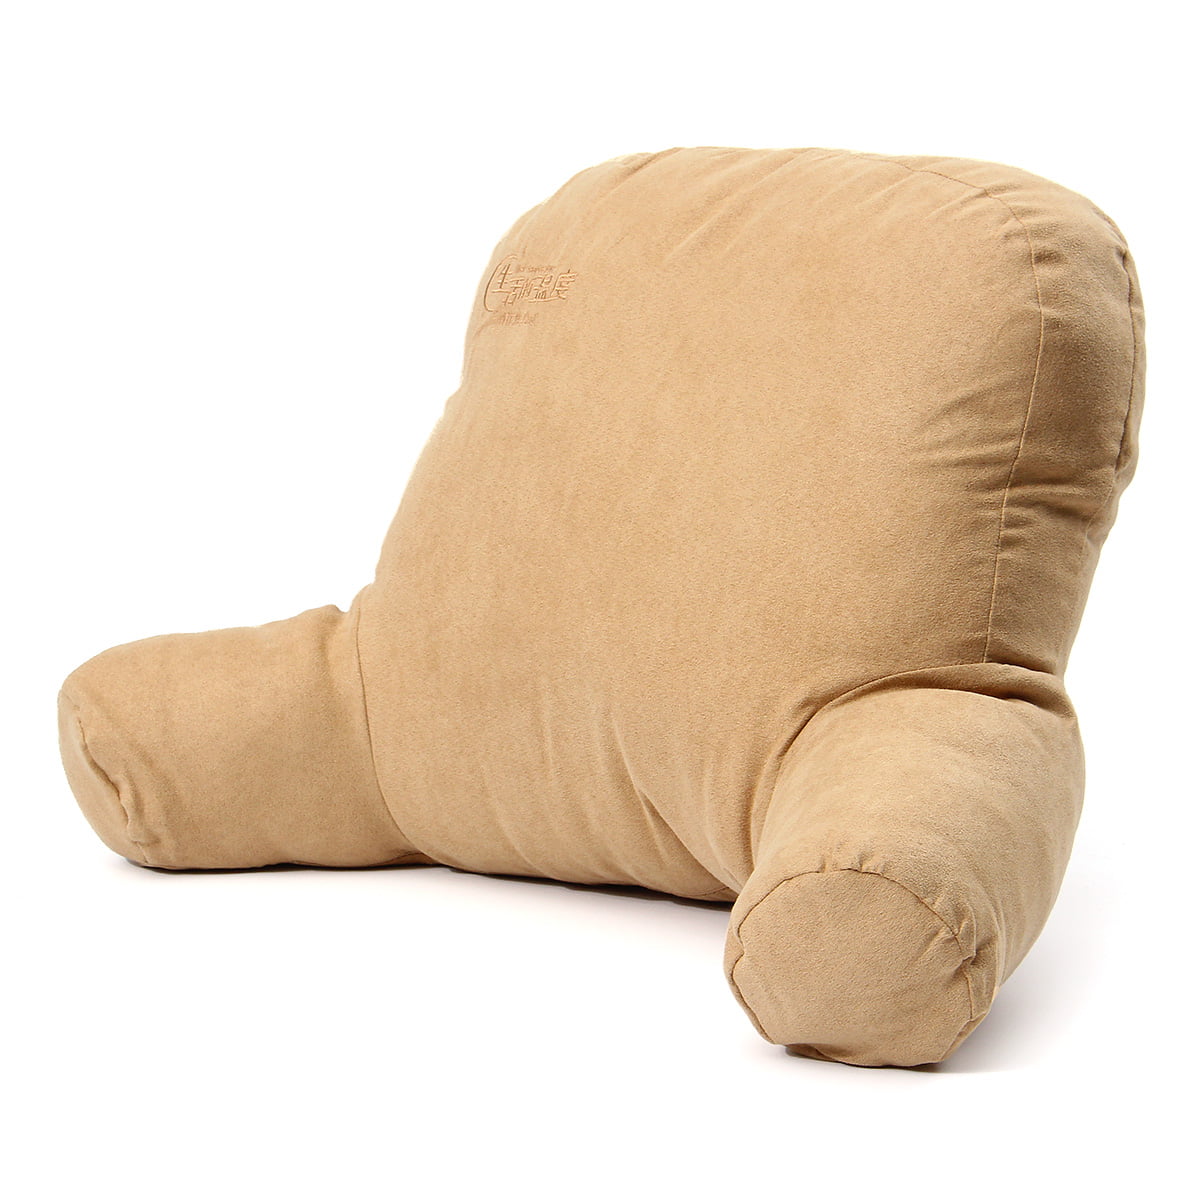 walmart bed pillow with arms